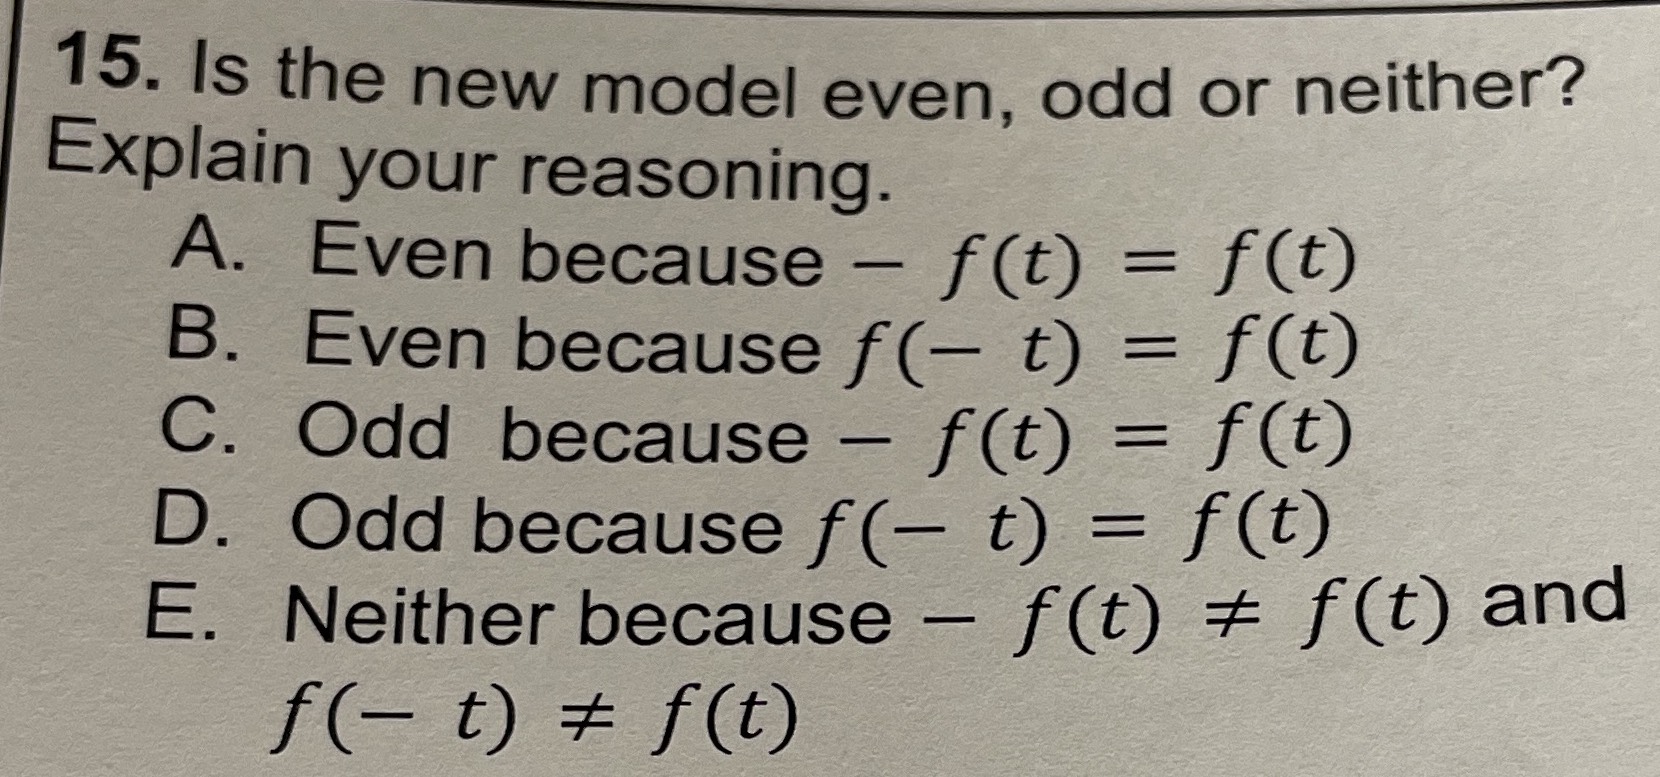 15. Is the new model even, odd or neither? Explain...